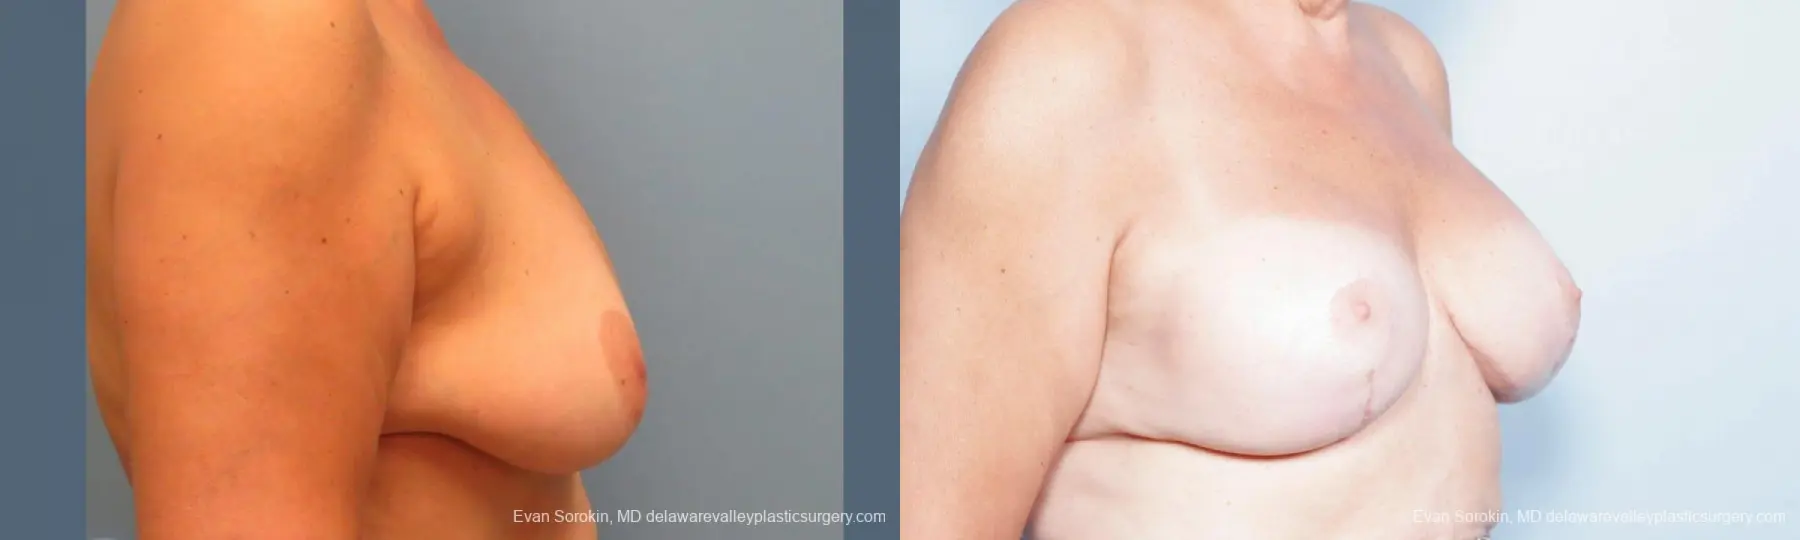 Philadelphia Breast Lift and Augmentation 9431 - Before and After 3